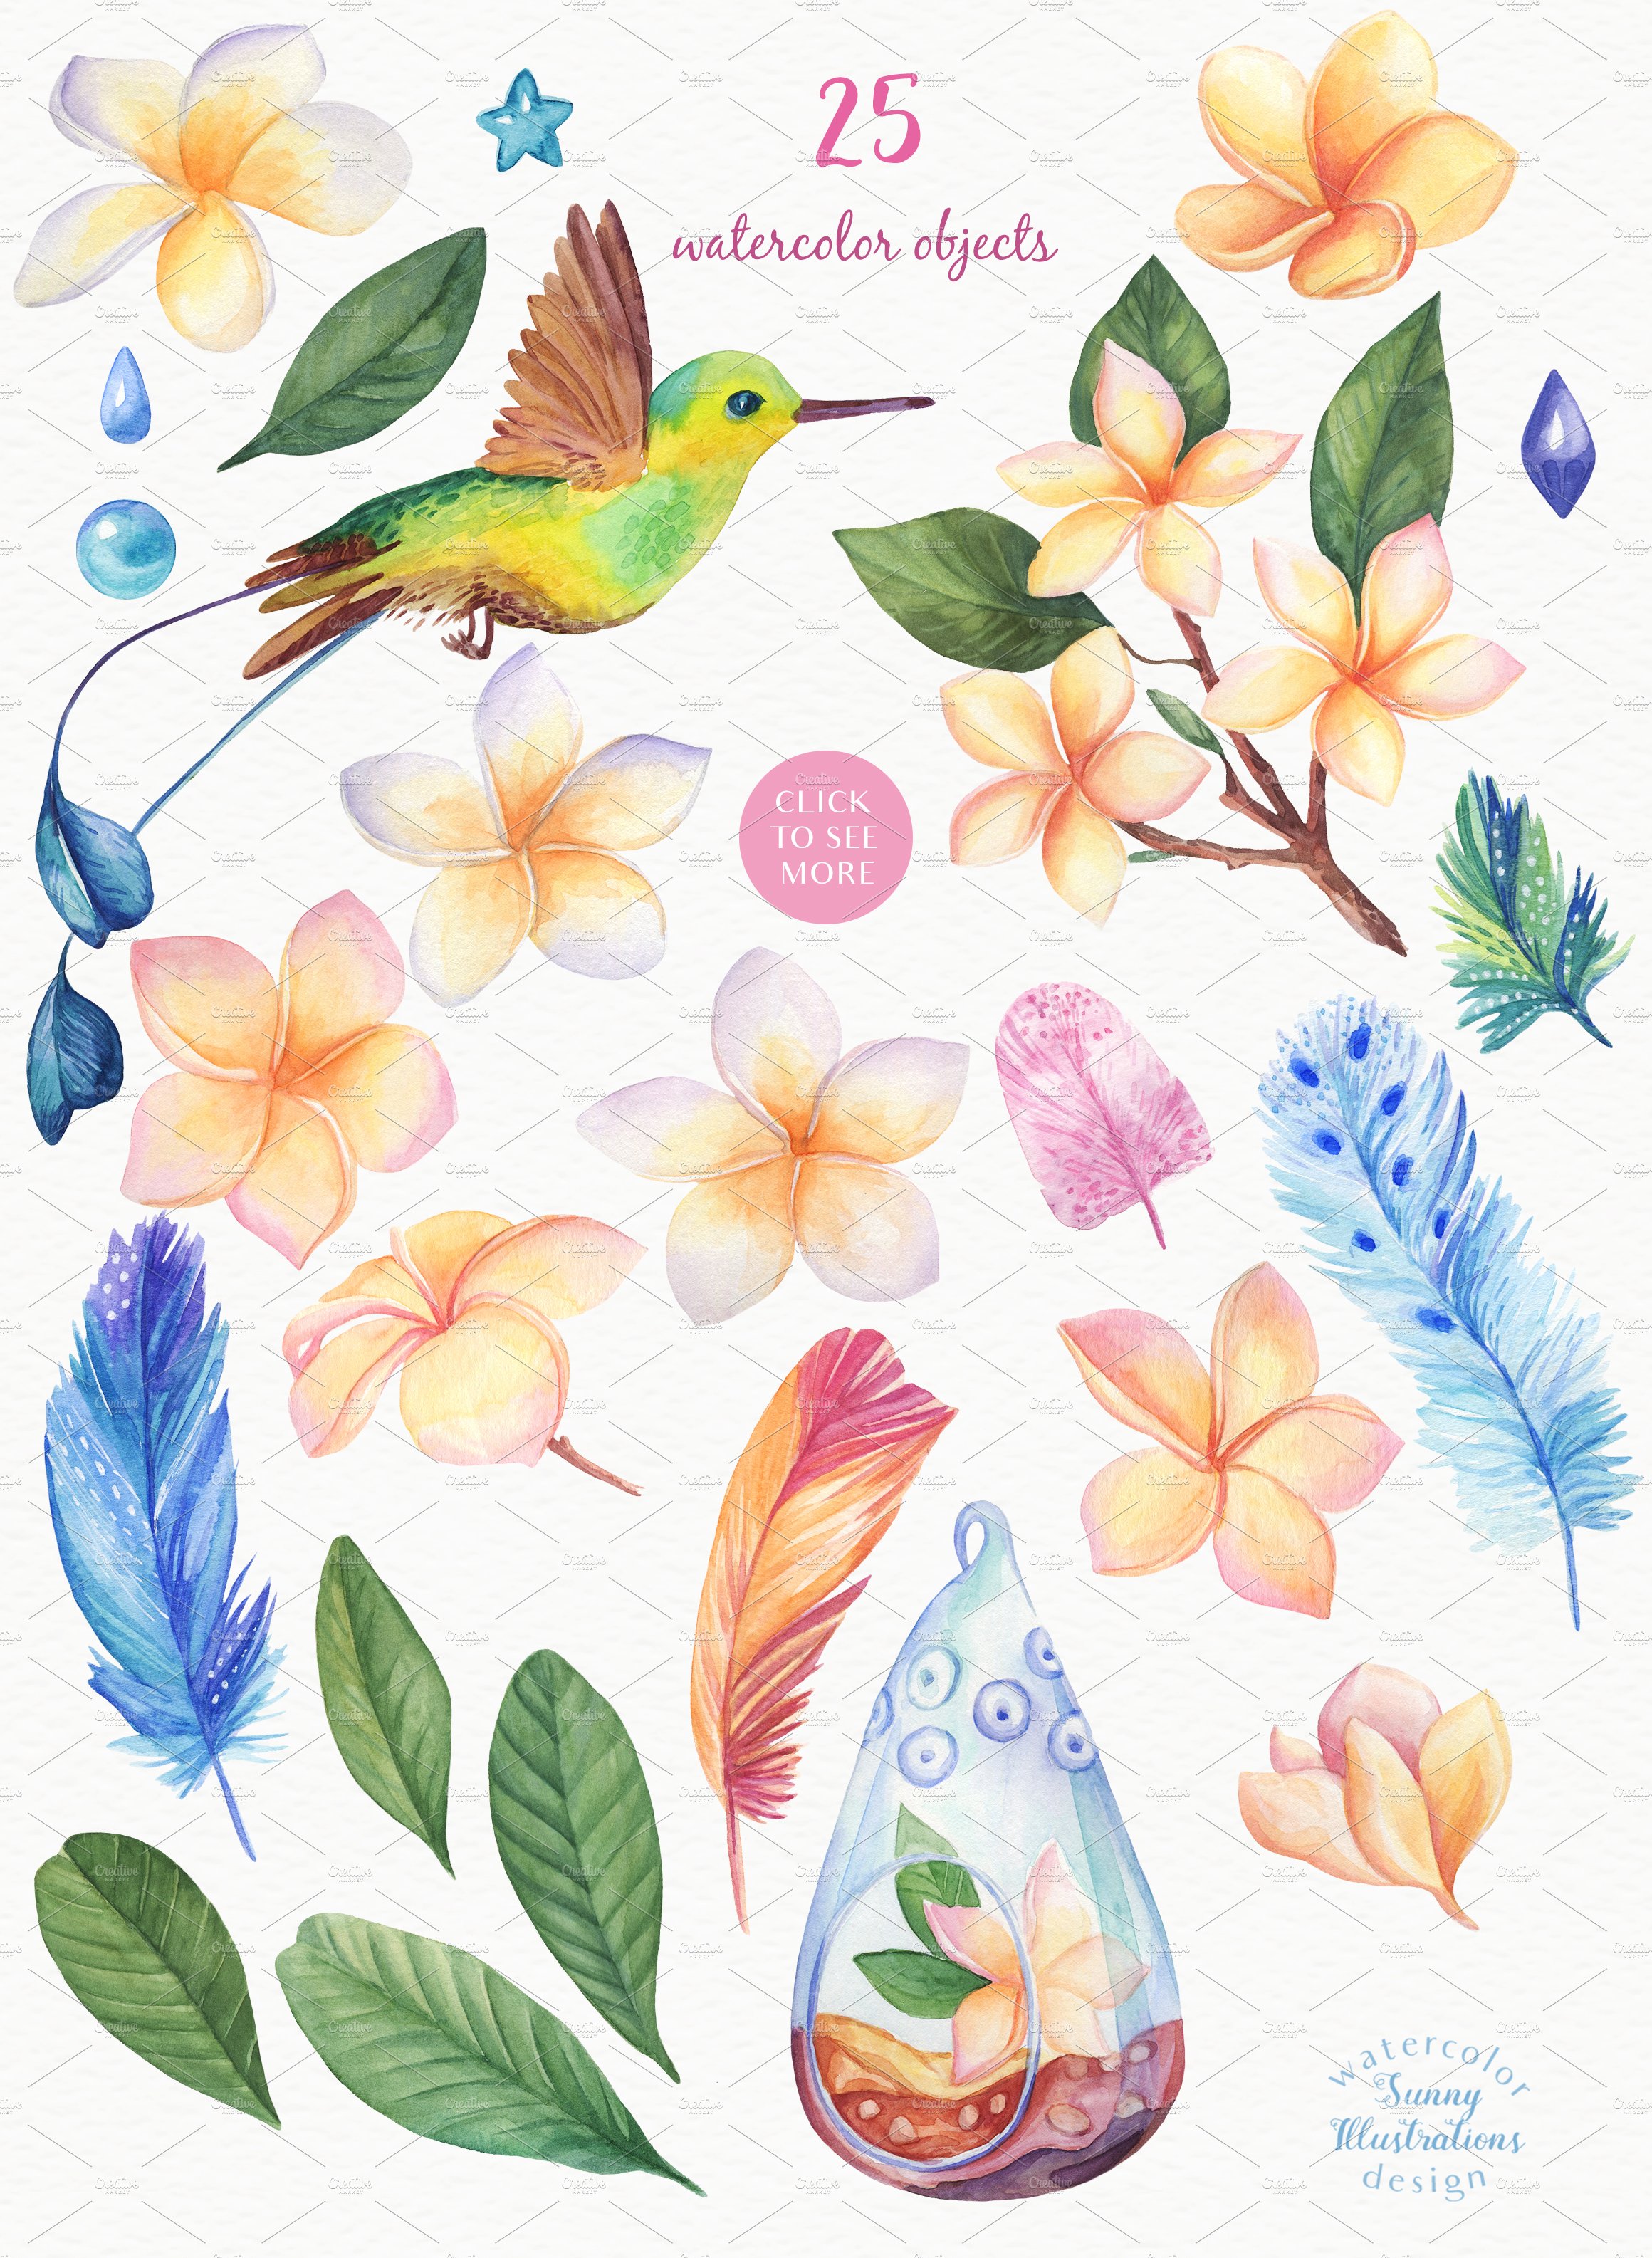 SALE! Tropical Blooming preview image.